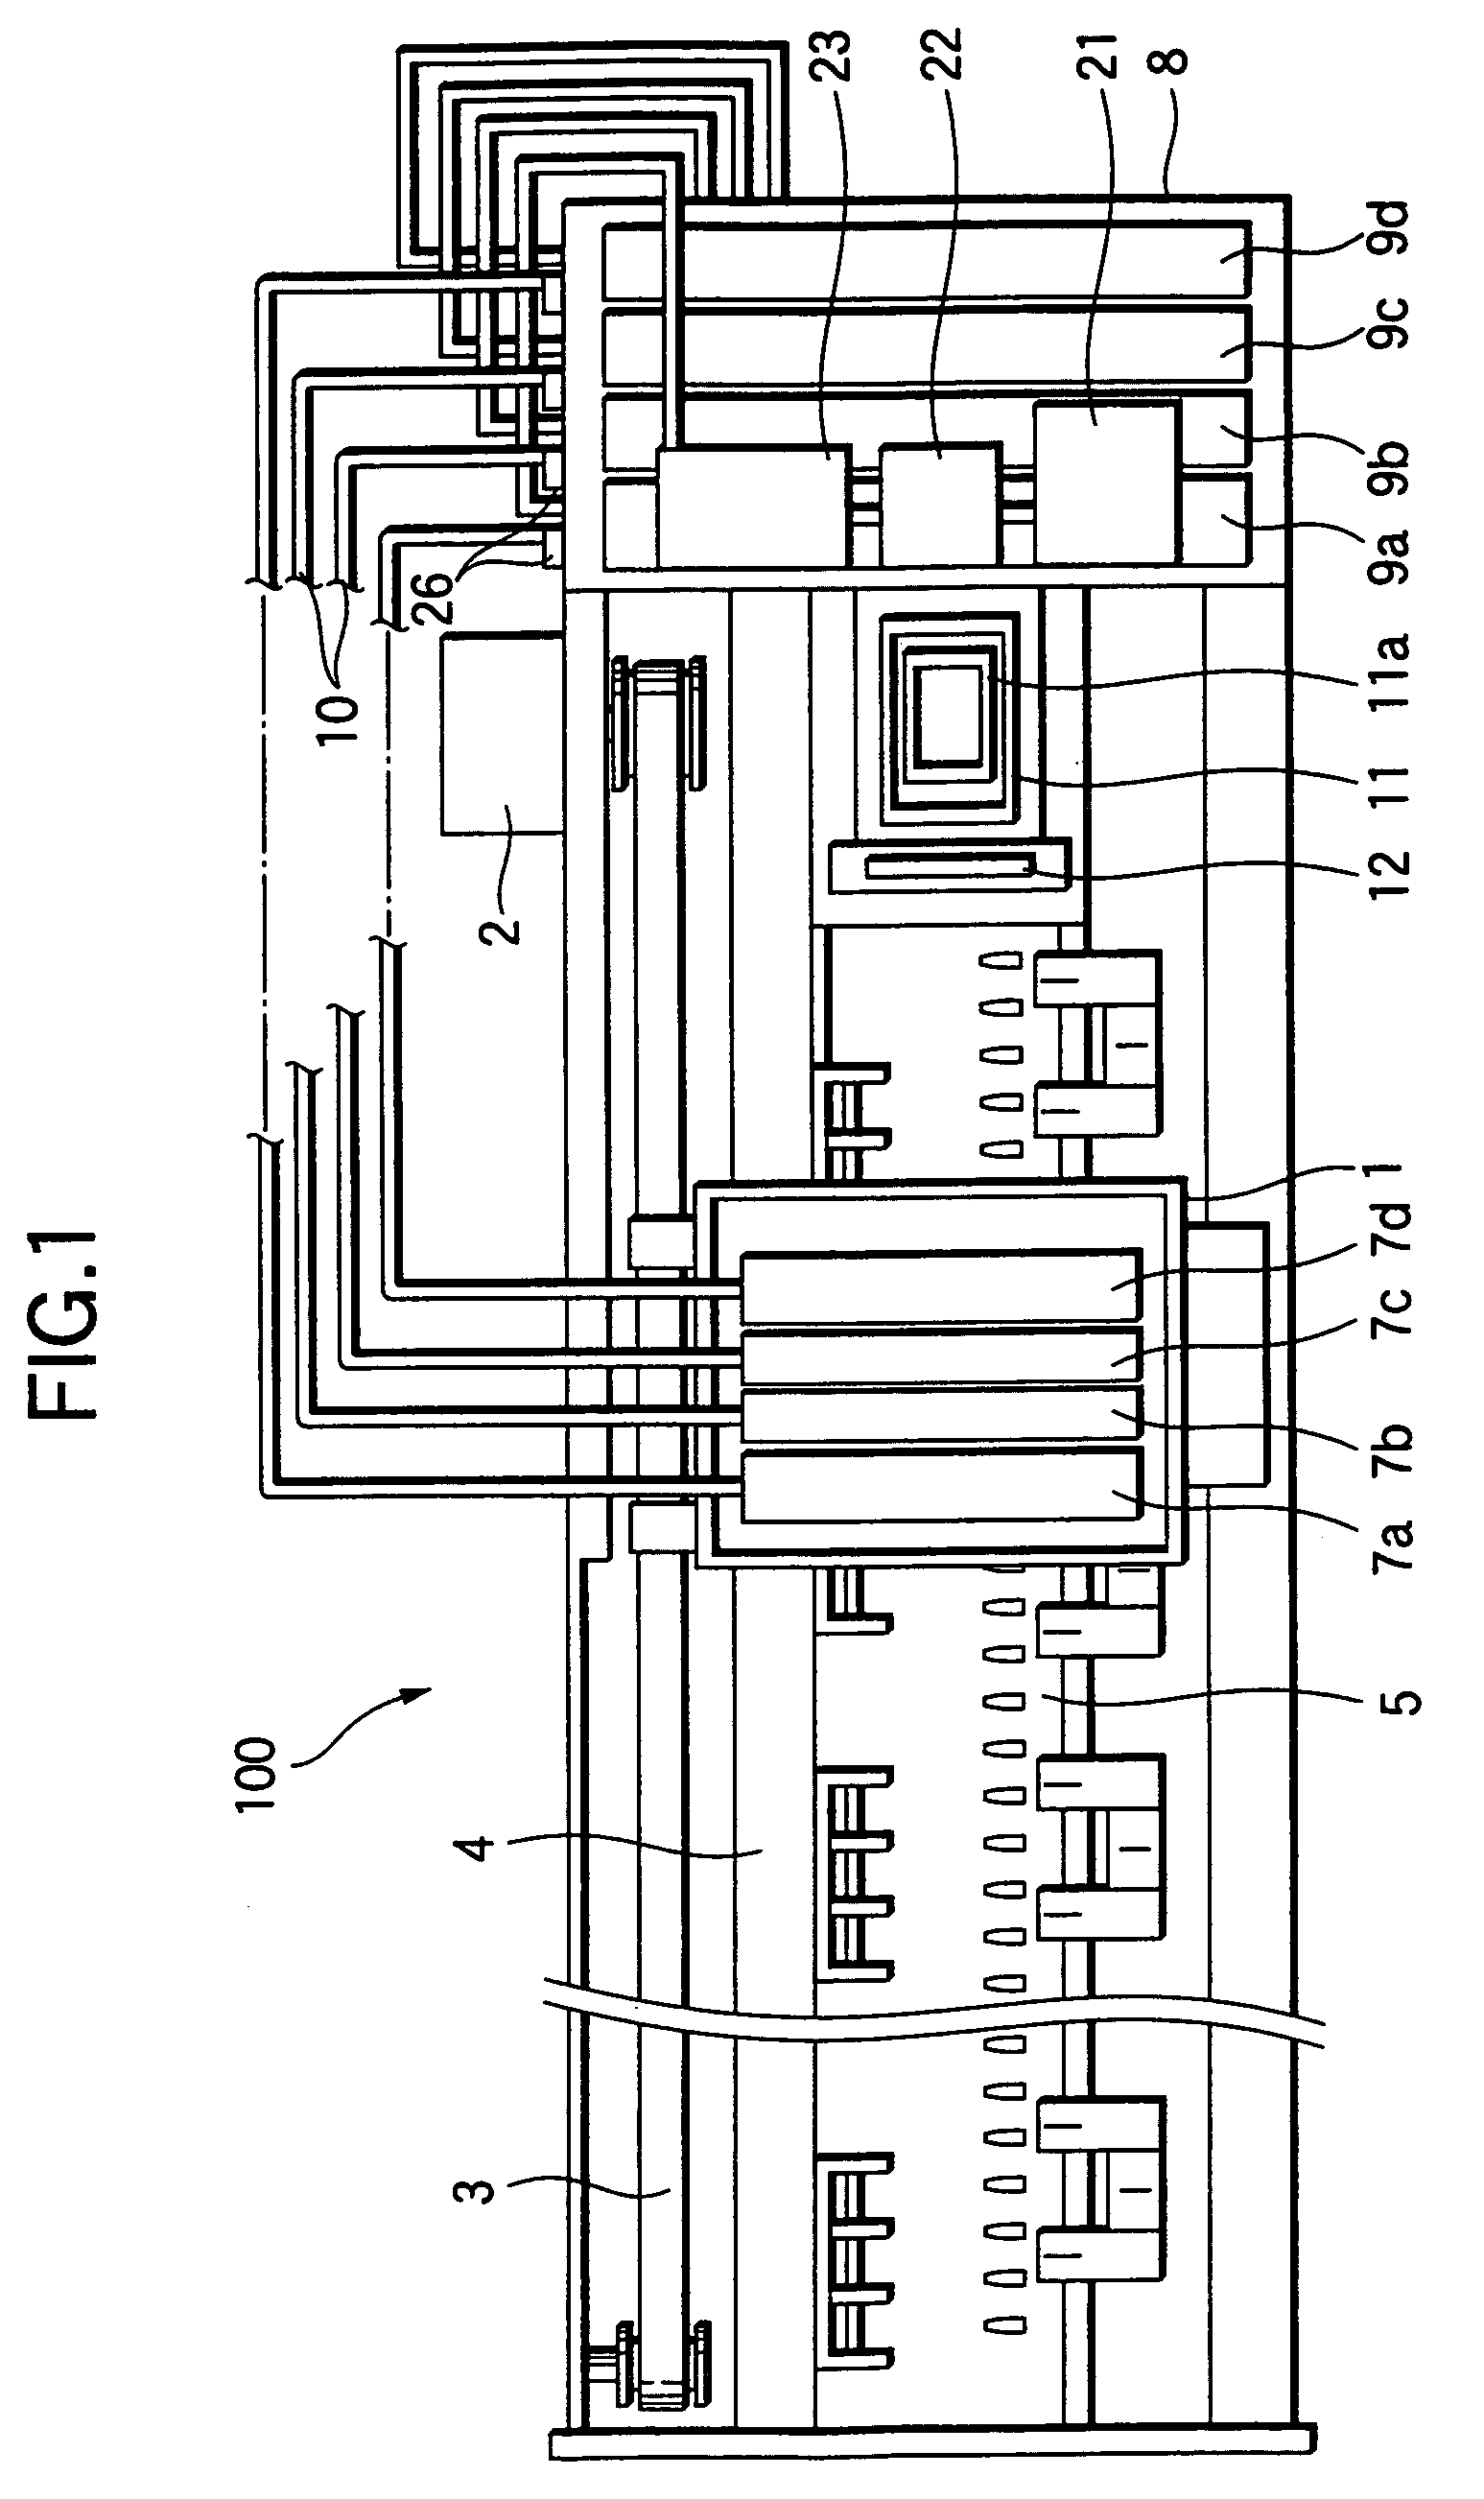 Ink jet type recording apparatus, ink type information setting method in the apparatus and ink cartridge used in the apparatus